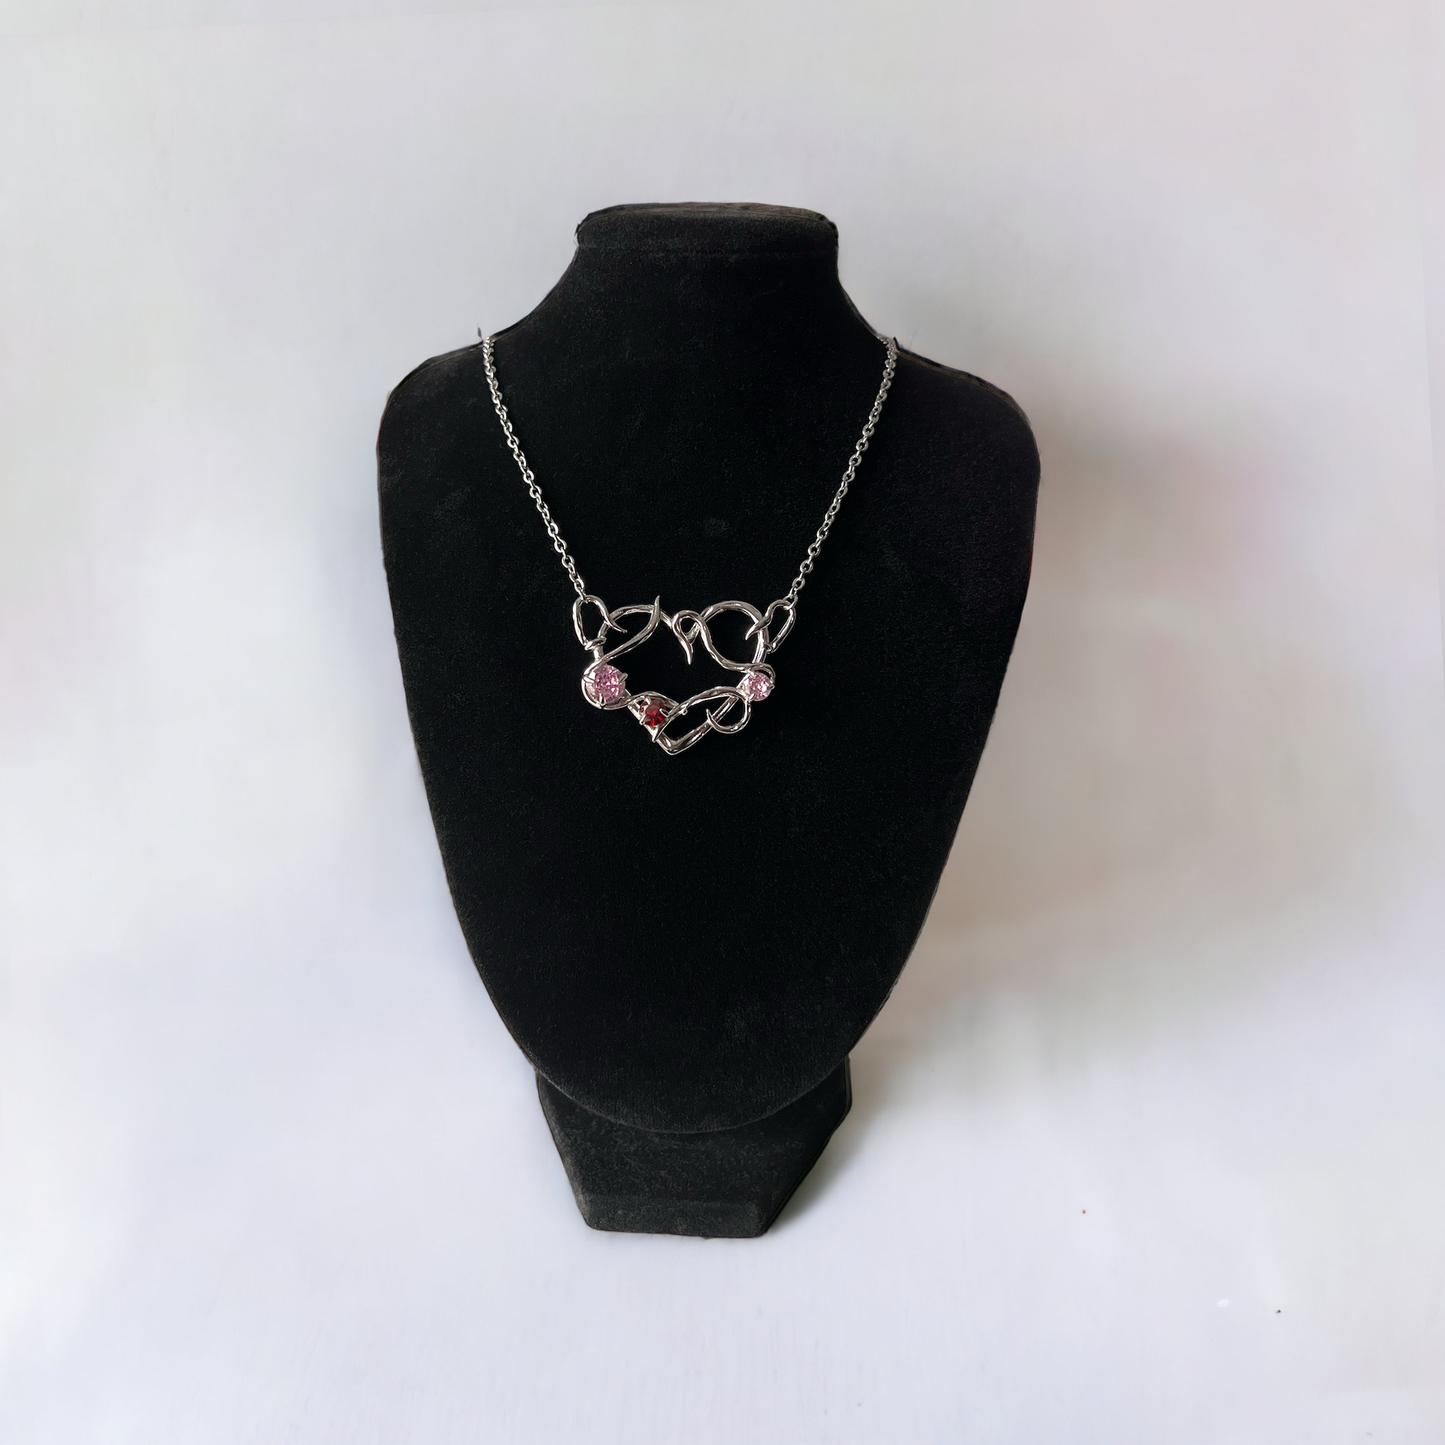 Heart of thorns necklace Silver (Garnet and Pink)